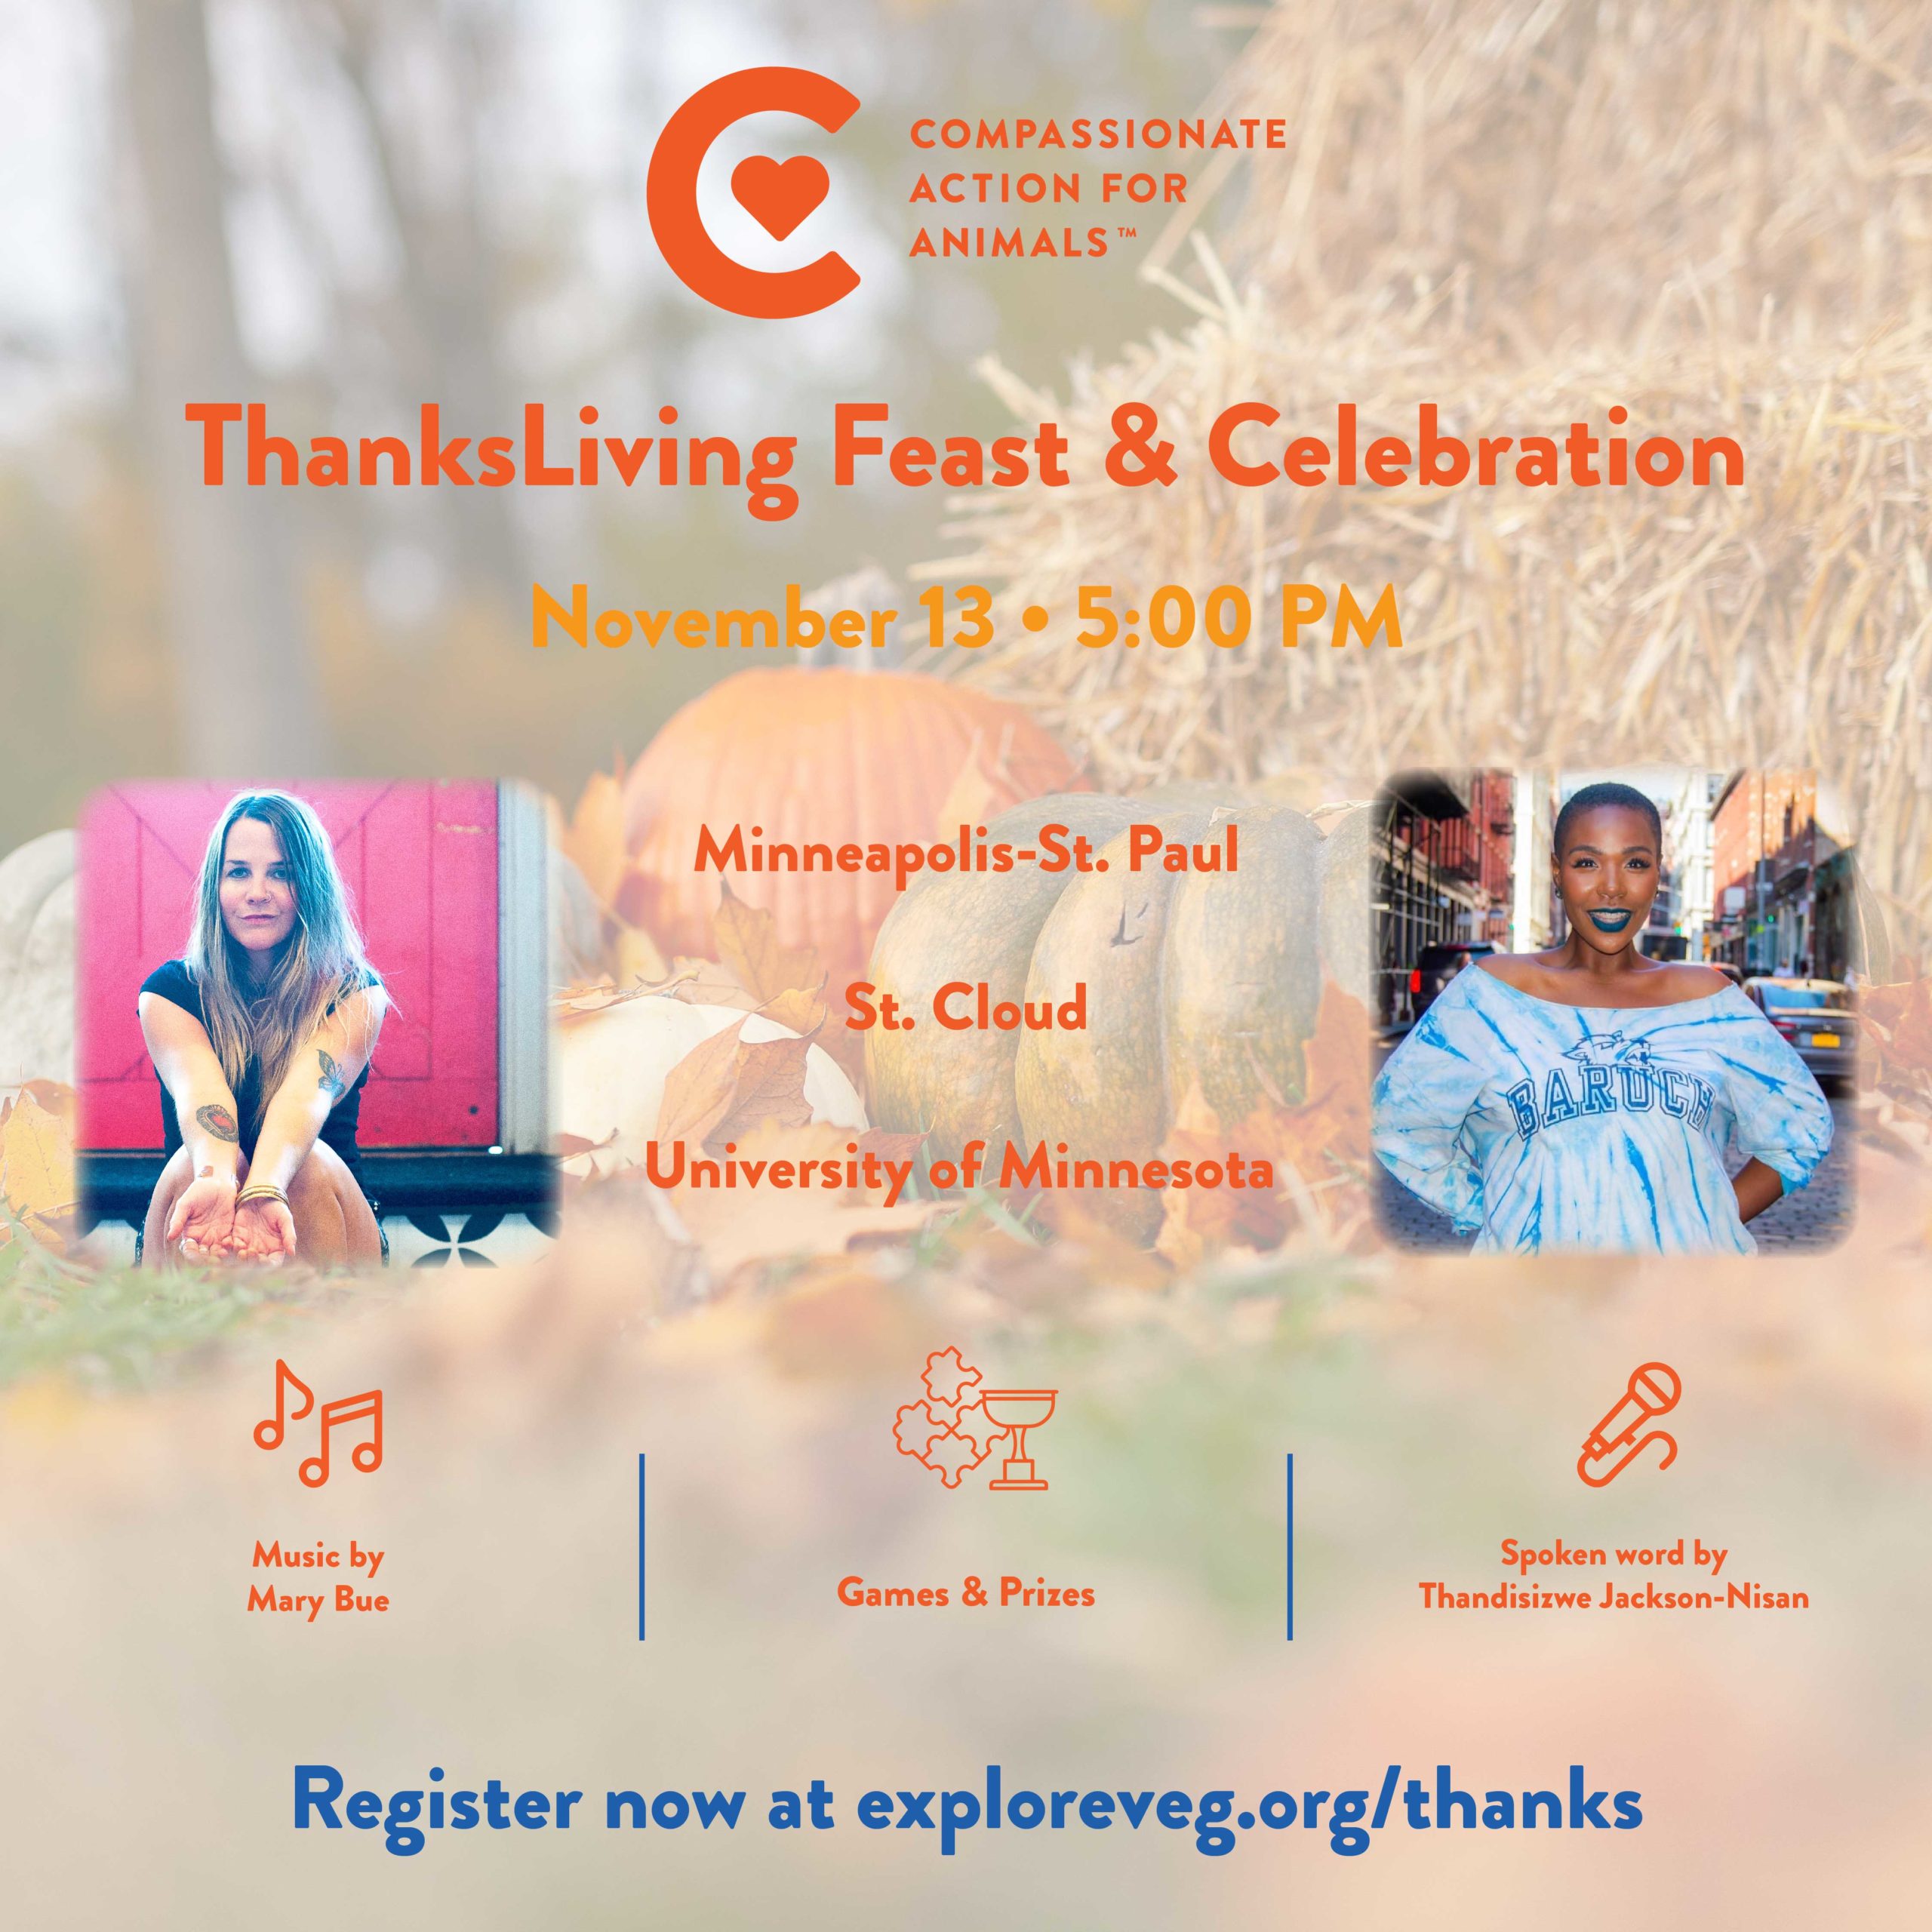 jacksonville teacher and peta to host thanksliving feast for students terbaru